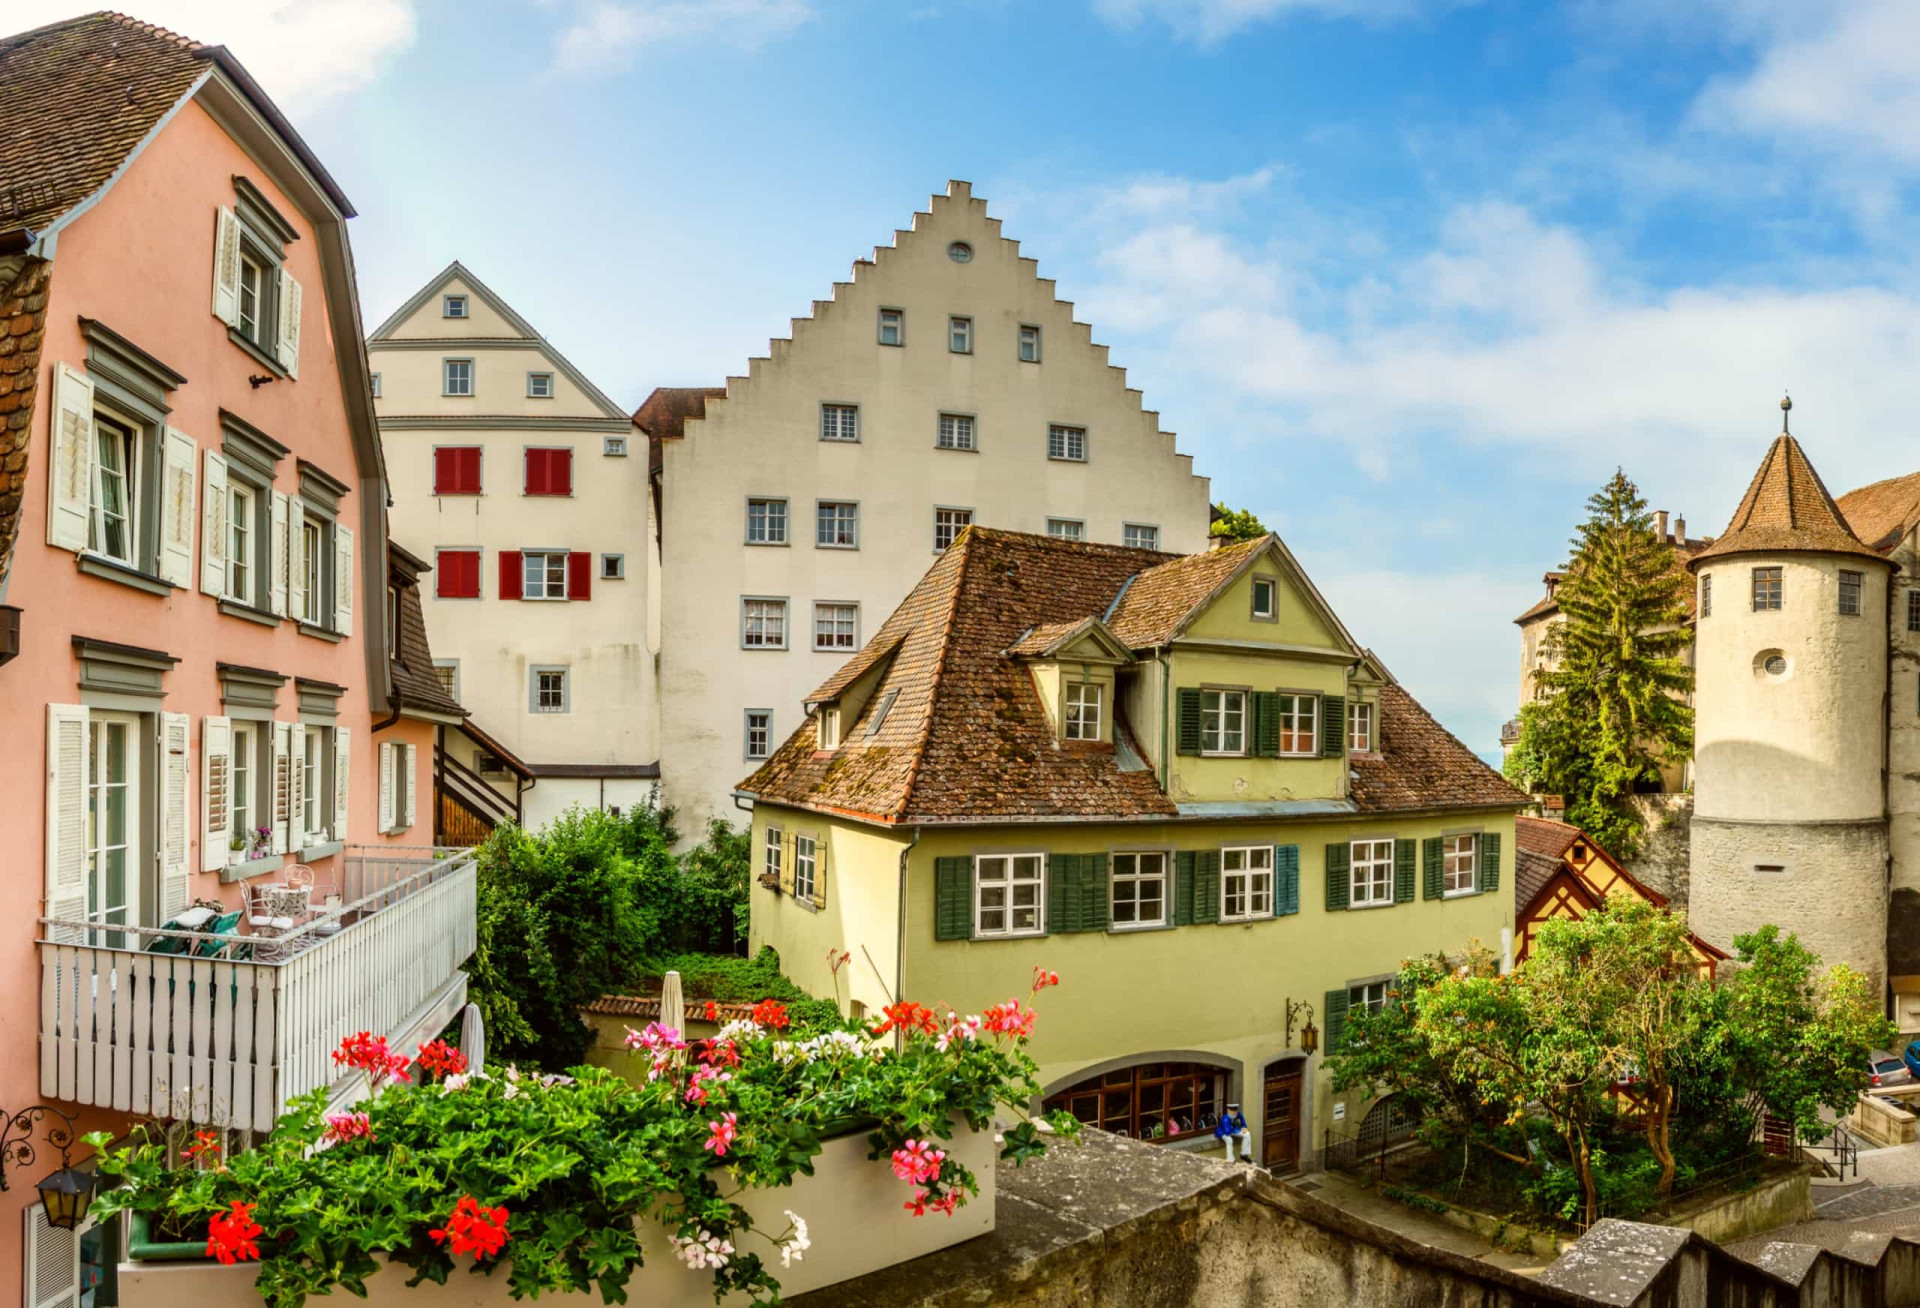 <p>Medieval Meersburg is home to two castles, an expanse of half-timber houses, and a pair of ancient town gates. In fact, you'd be forgiven for thinking you were back in the Middle Ages!</p><p>You may also like:<a href="https://www.starsinsider.com/n/460706?utm_source=msn.com&utm_medium=display&utm_campaign=referral_description&utm_content=481885v1en-us"> Fascinating facts about Formula One racing</a></p>